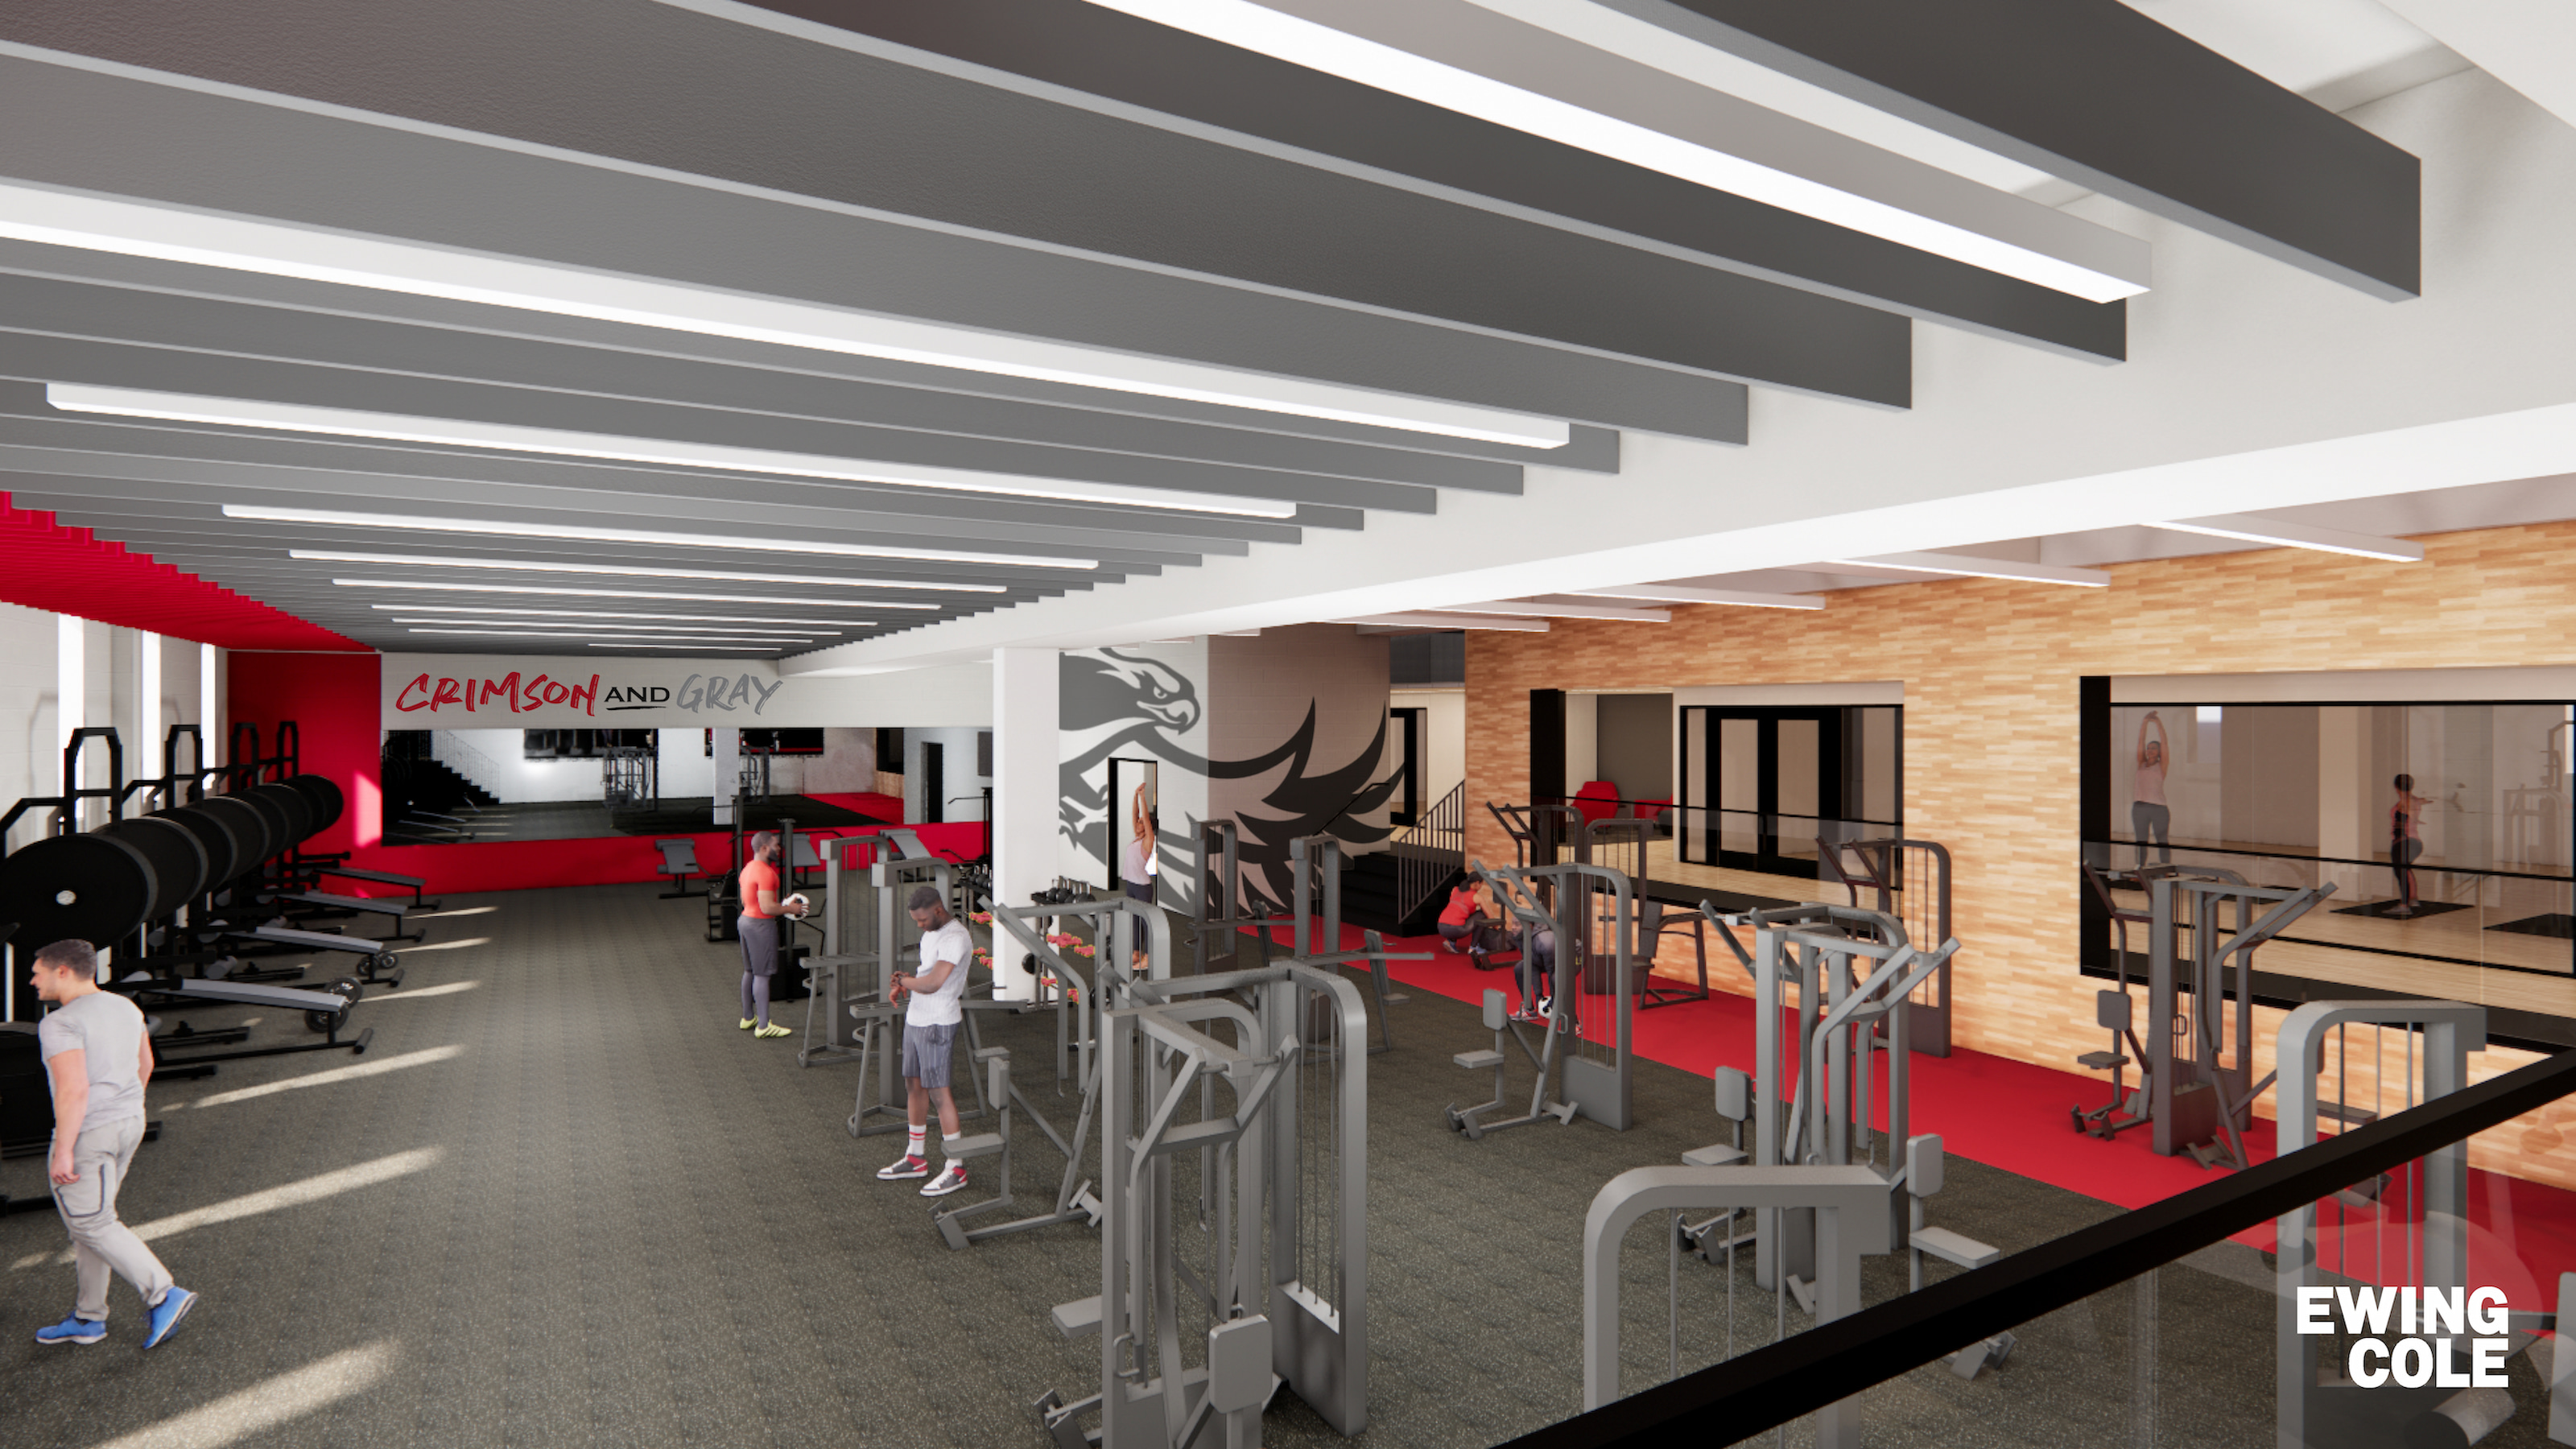 Improvements to the fitness center will allow for more natural light in this enhanced, open-concept floor plan. Group exercise classes will be housed in two new, large flex spaces equipped with mirrors, body-weight training equipment and other class-specific equipment